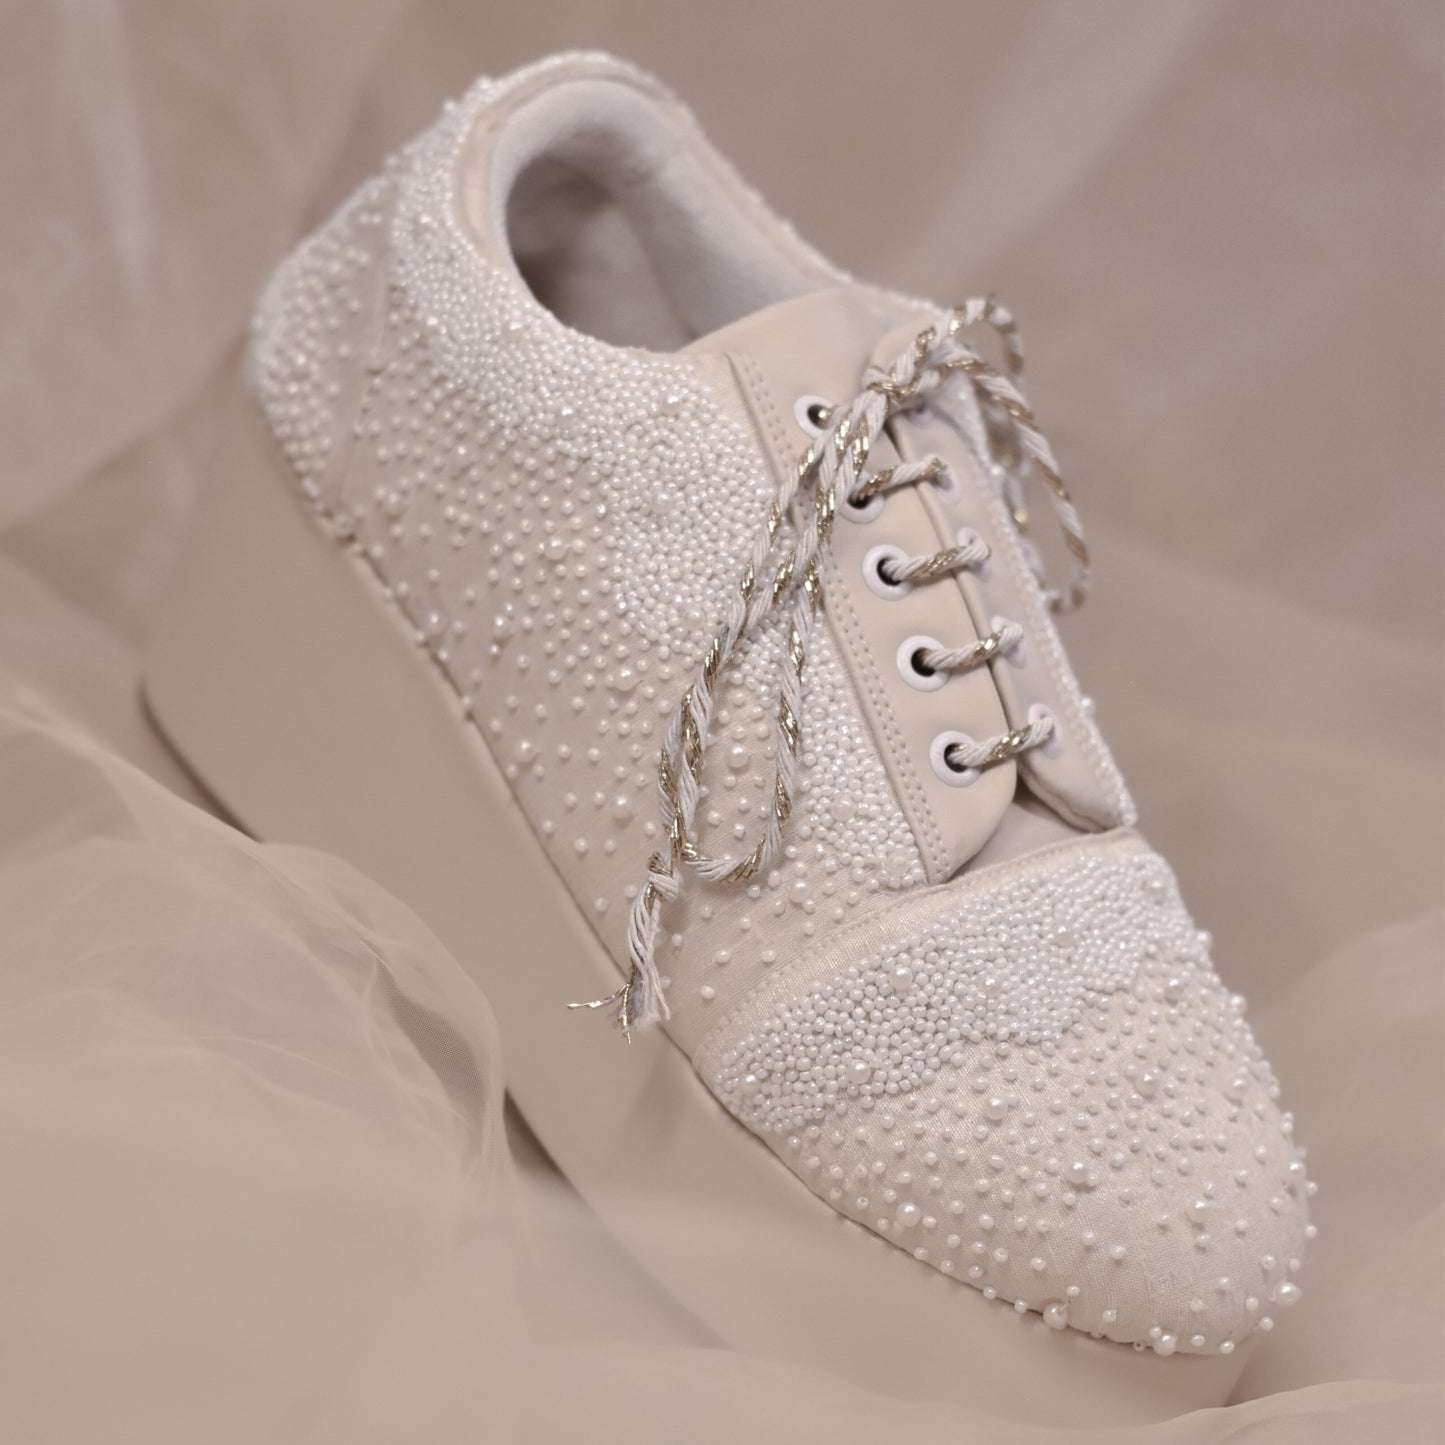 Lace up white sneakers for weddings